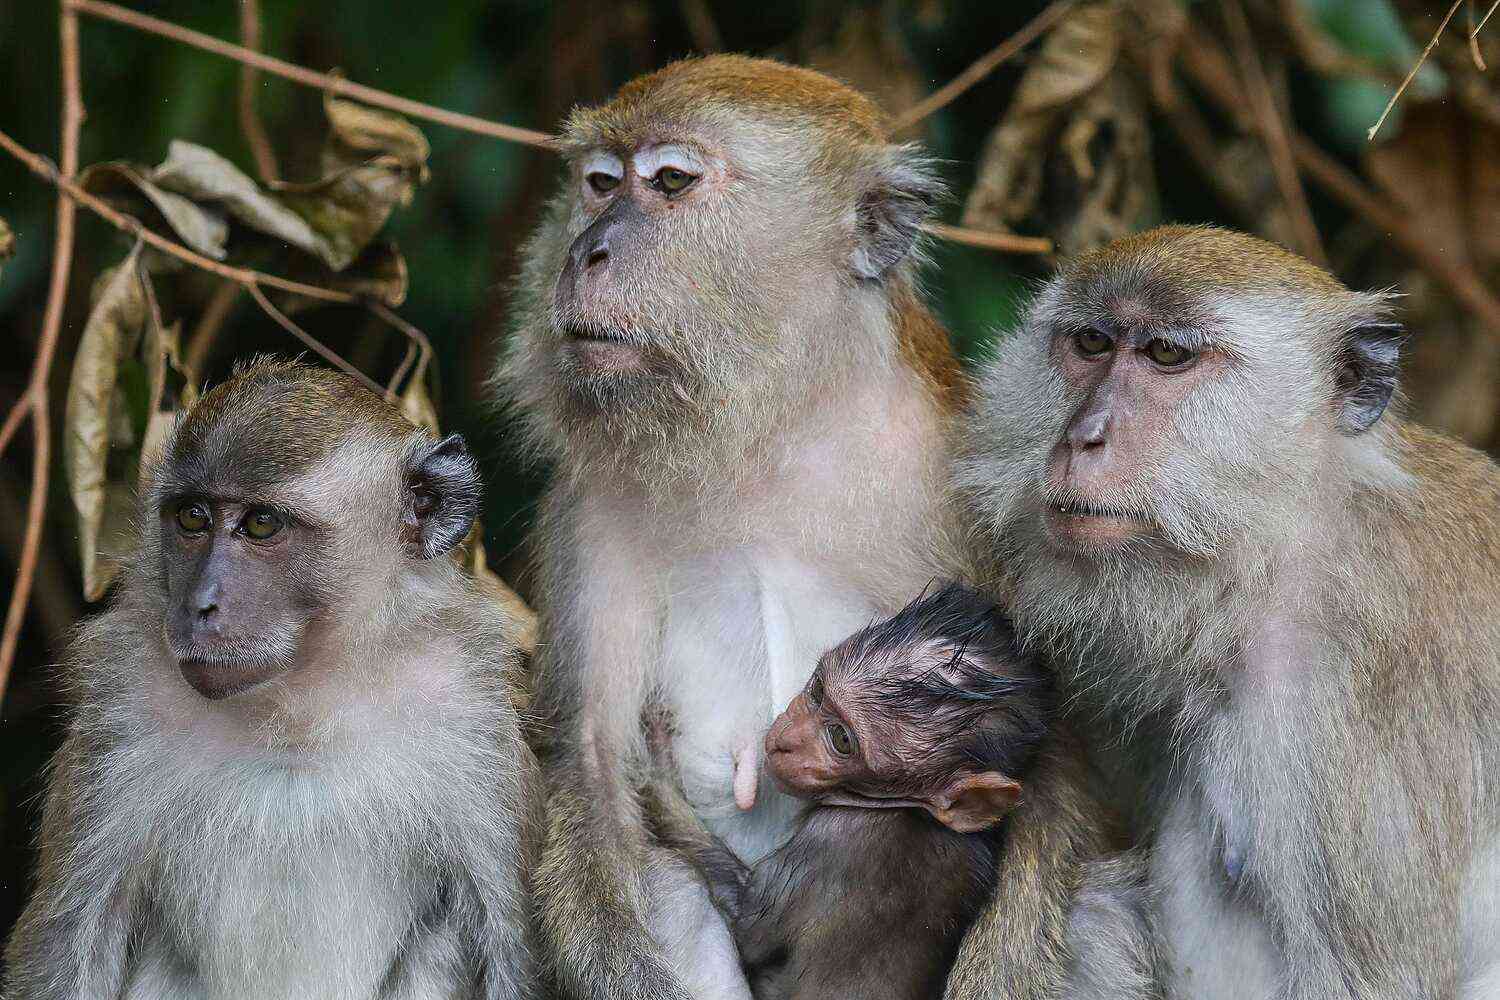 U.S. charges 200 people in smuggling endangered monkeys into the United States